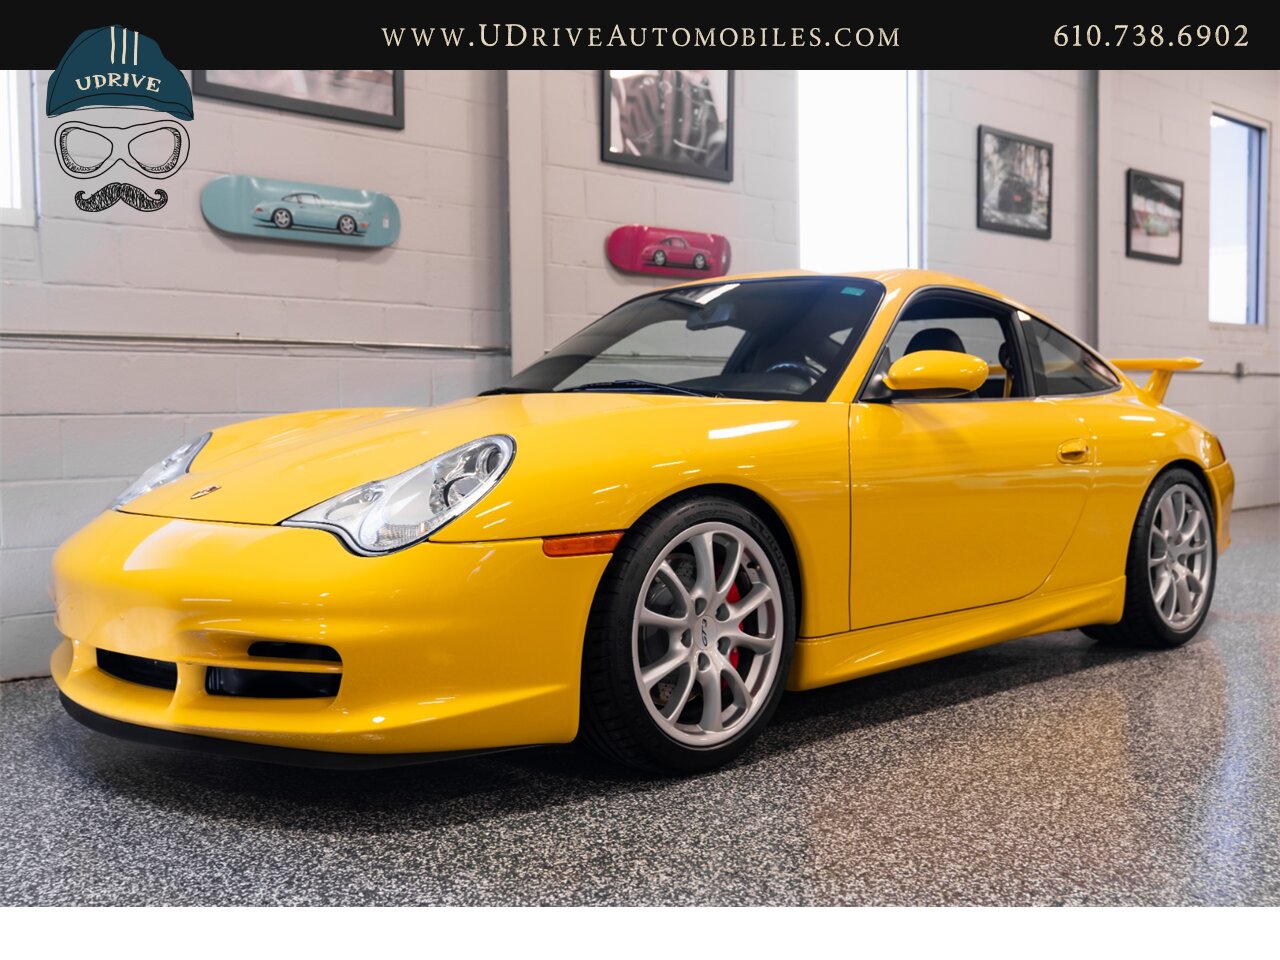 2005 Porsche 911 GT3 996 Speed Yellow Sport Seats Pntd Hardbacks  Pntd Console Deviating Stitch Yellow Accents Throughout - Photo 10 - West Chester, PA 19382